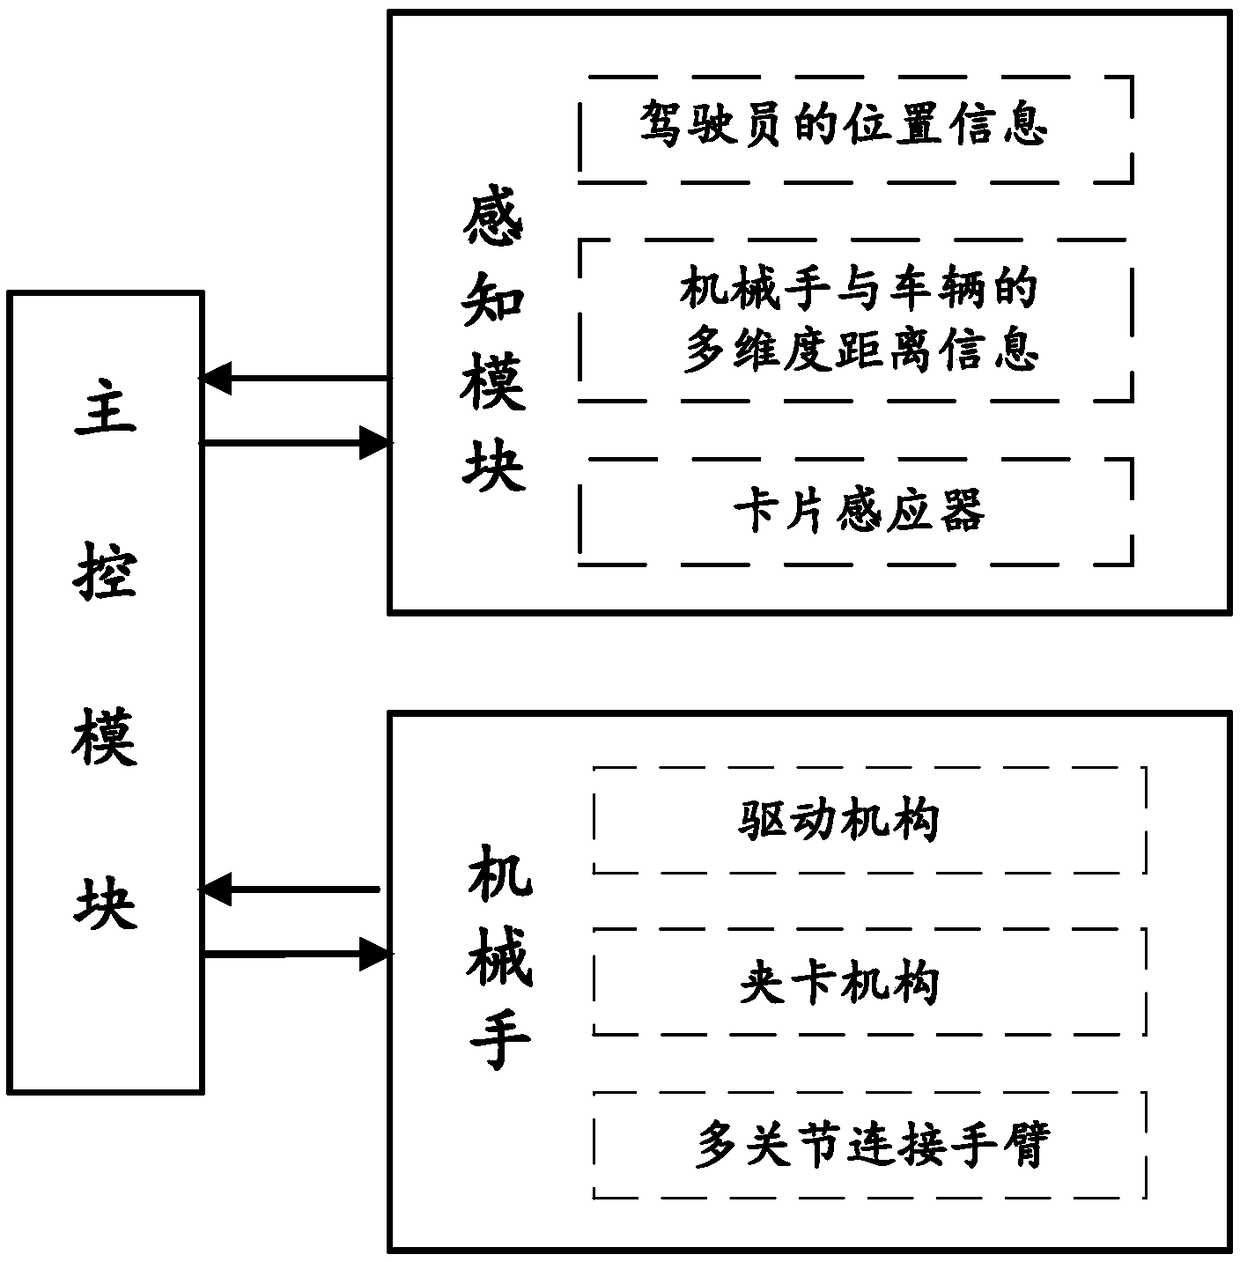 Intelligent card passing system used for highway